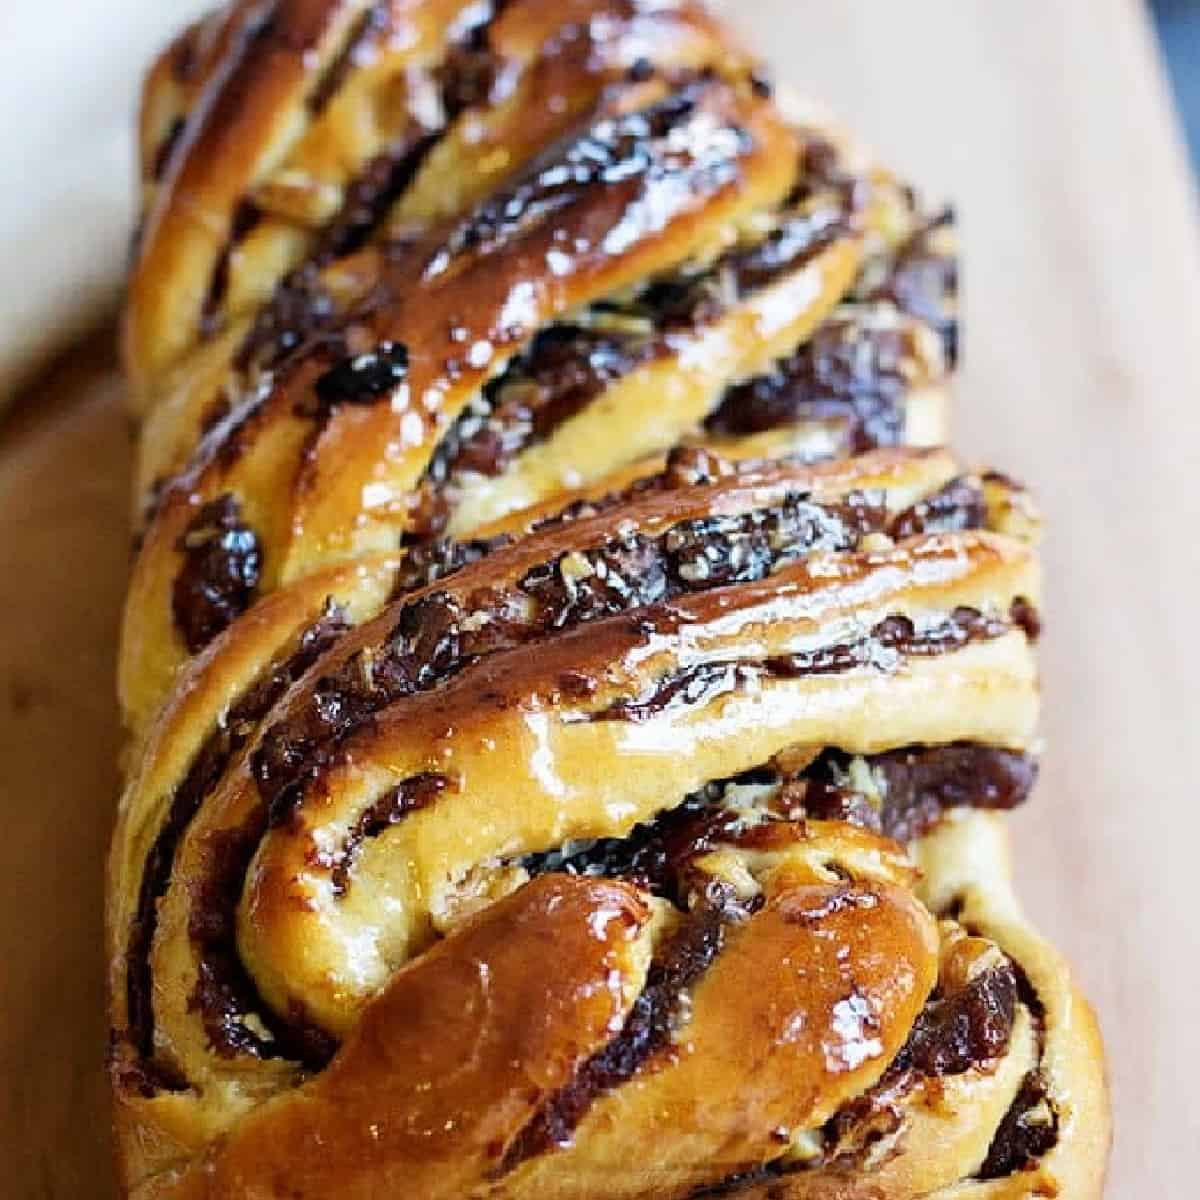 This classic babka recipe is getting a delicious twist. Soft dough filled with sweet dates and crunchy walnuts makes a this a mouth-watering treat.
